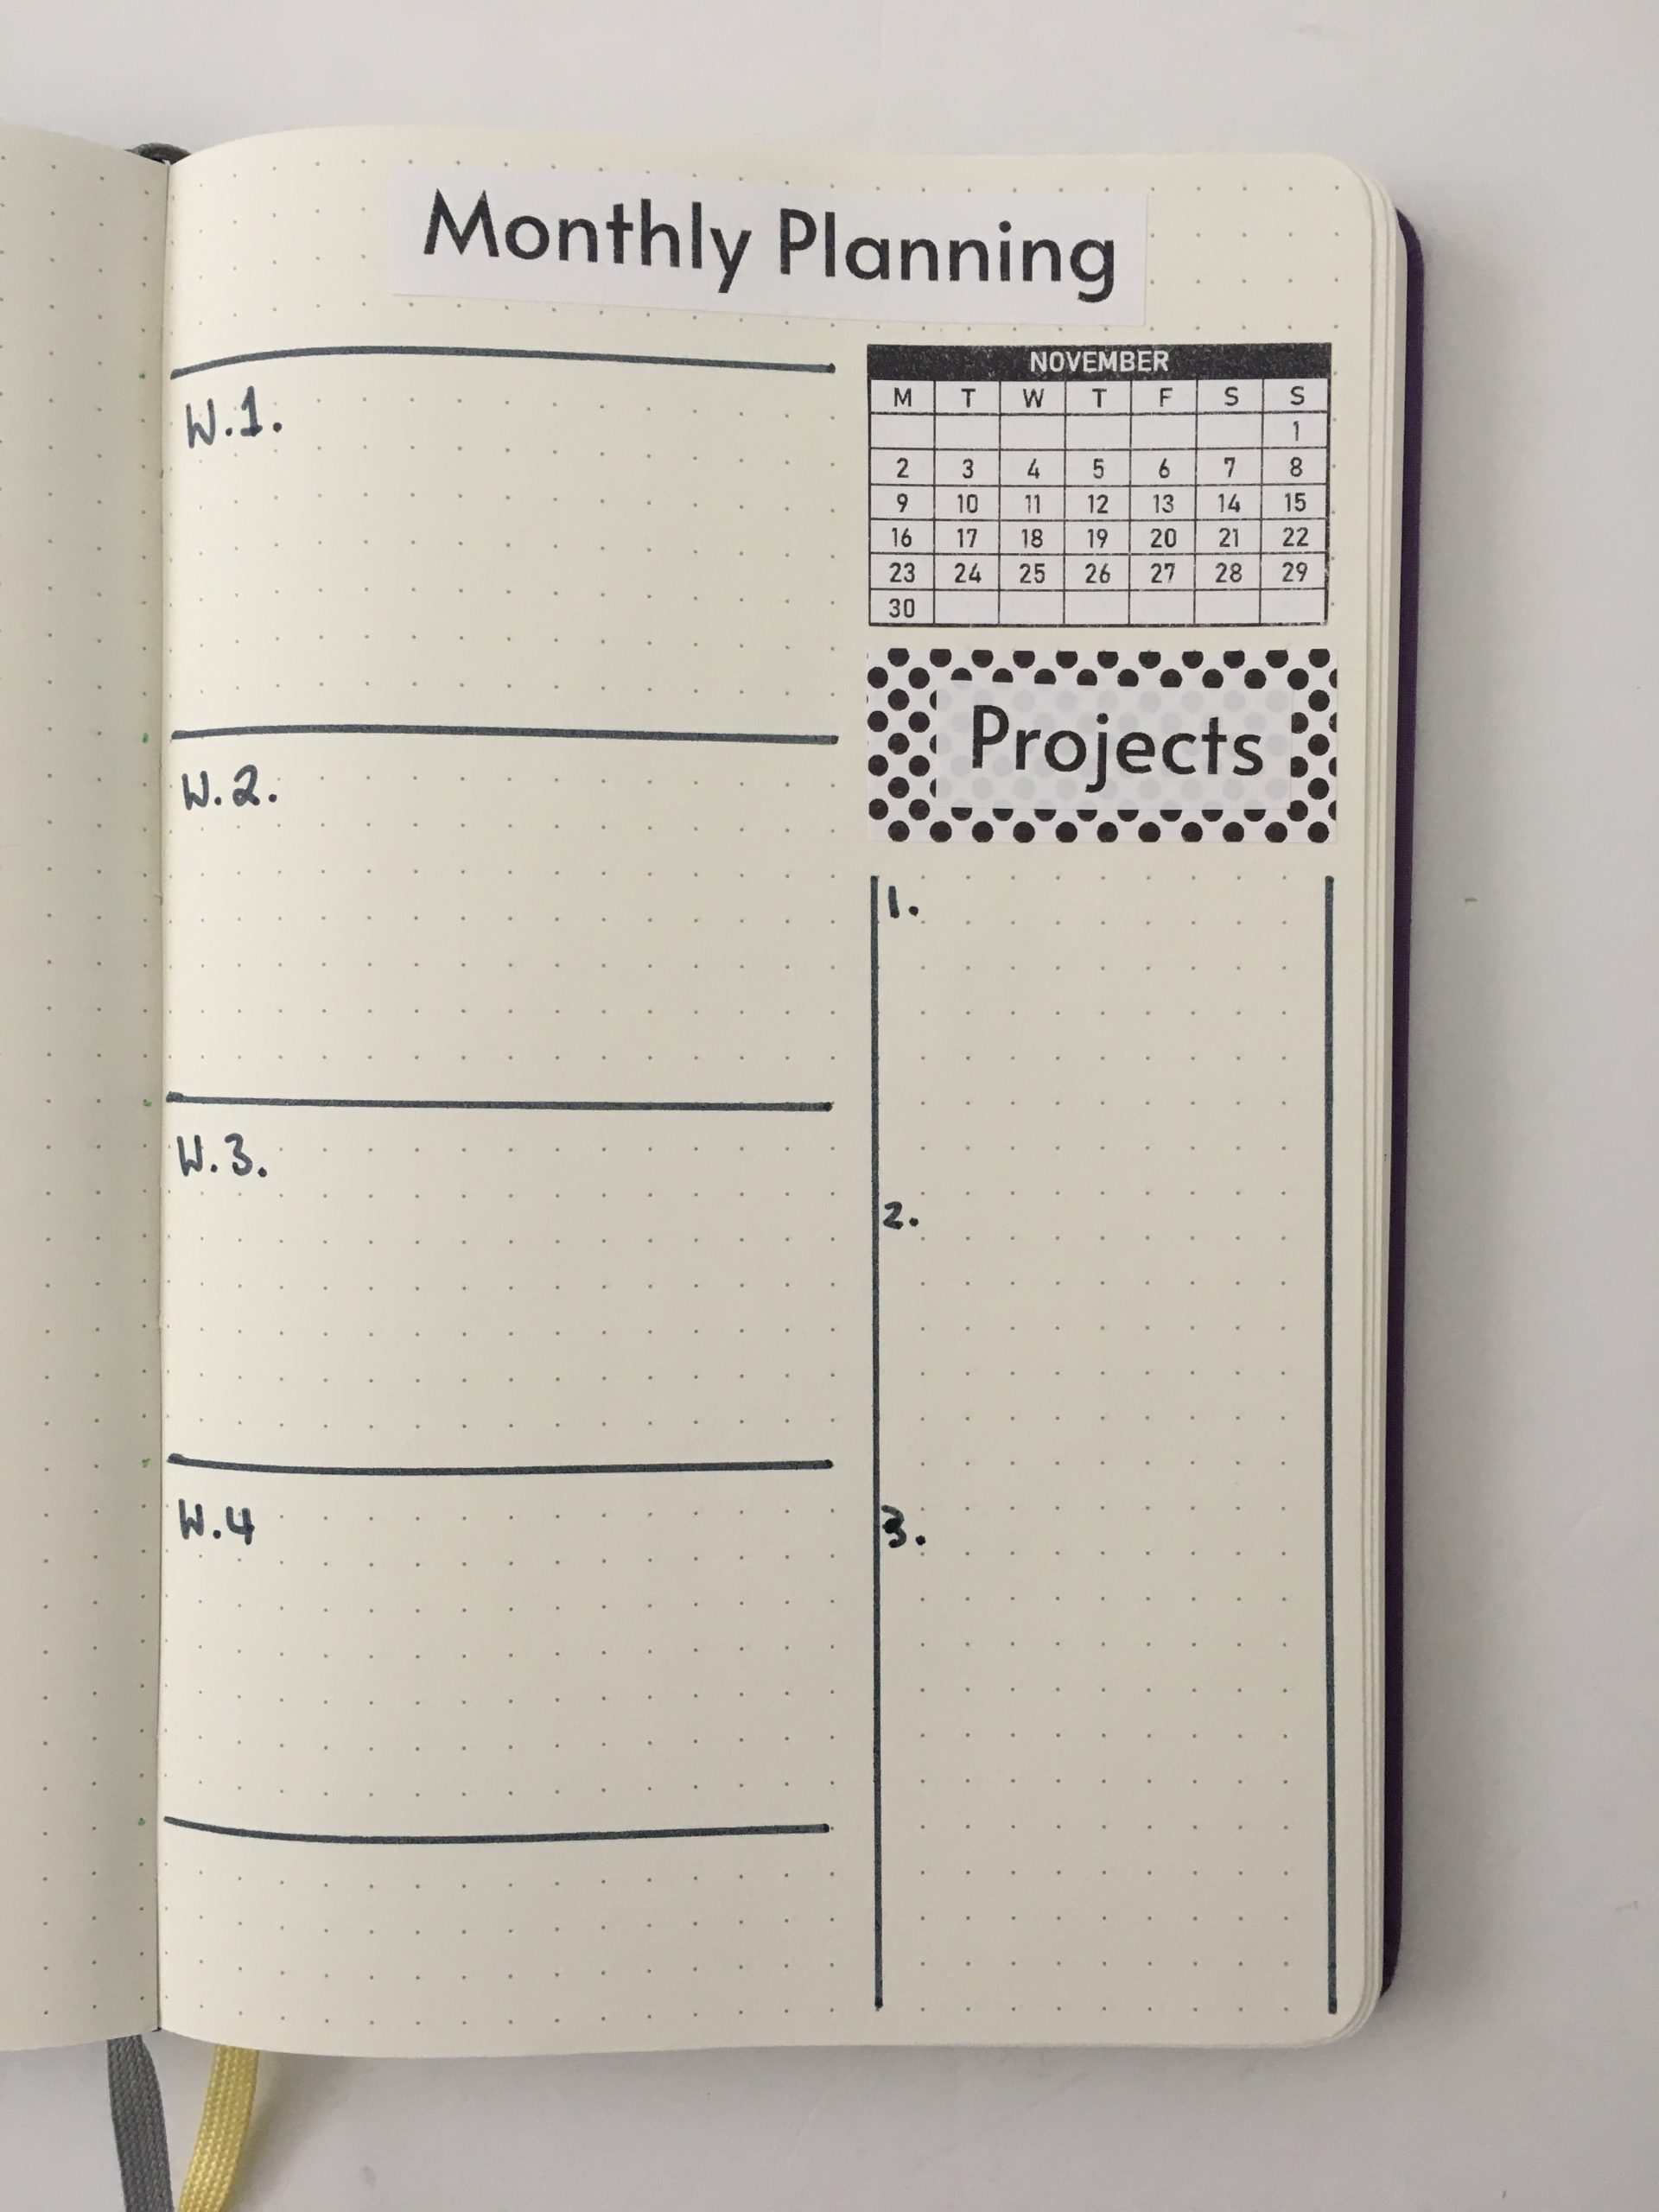 12 Bullet journal annual planning page layout ideas